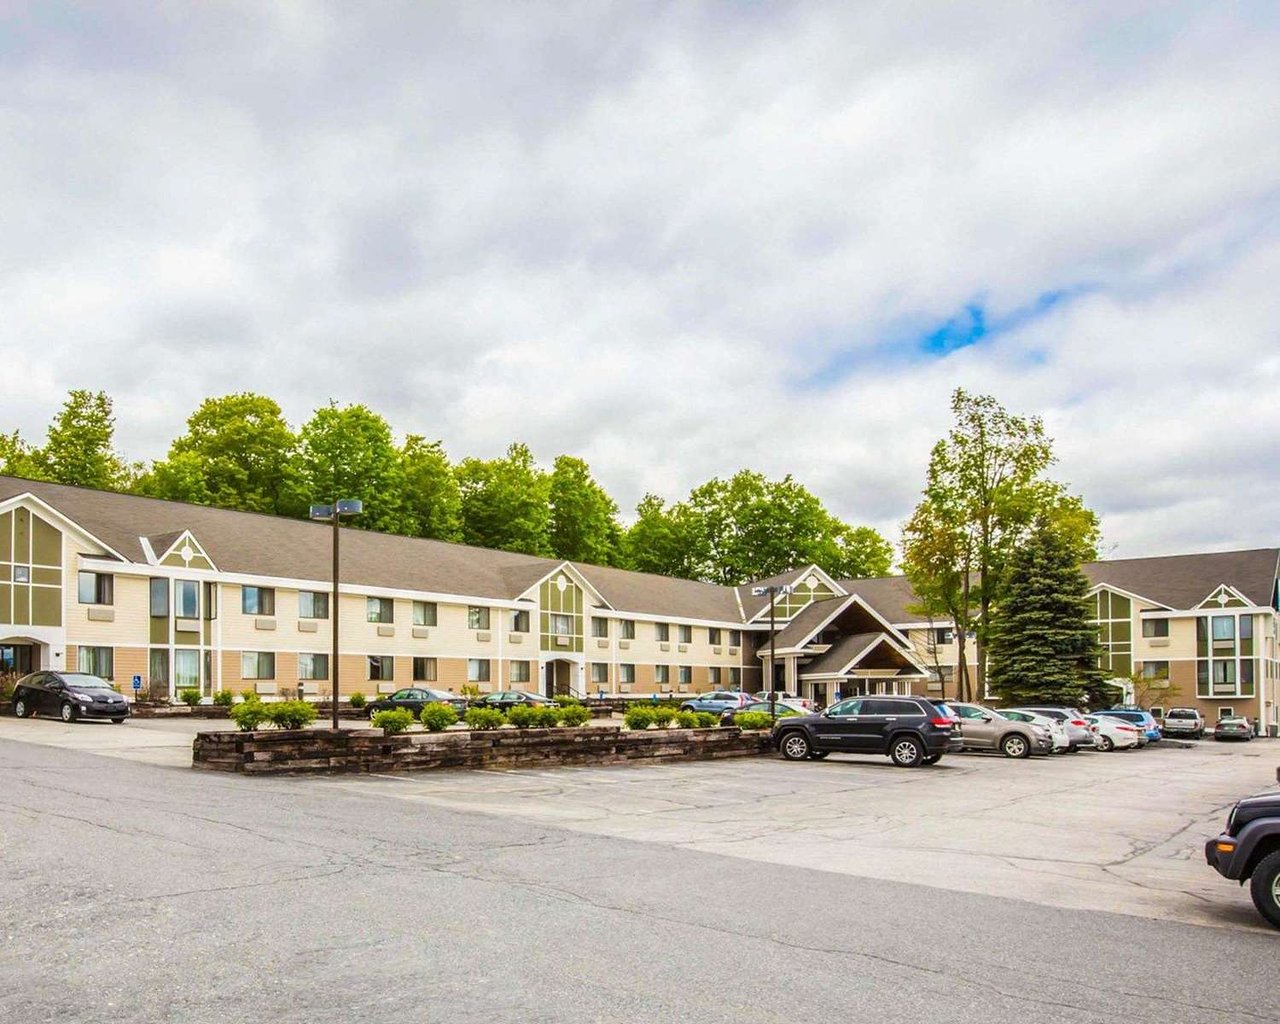 Northfield Fireplace Elegant the Best Hotels In northfield Falls Vt for 2019 From $80